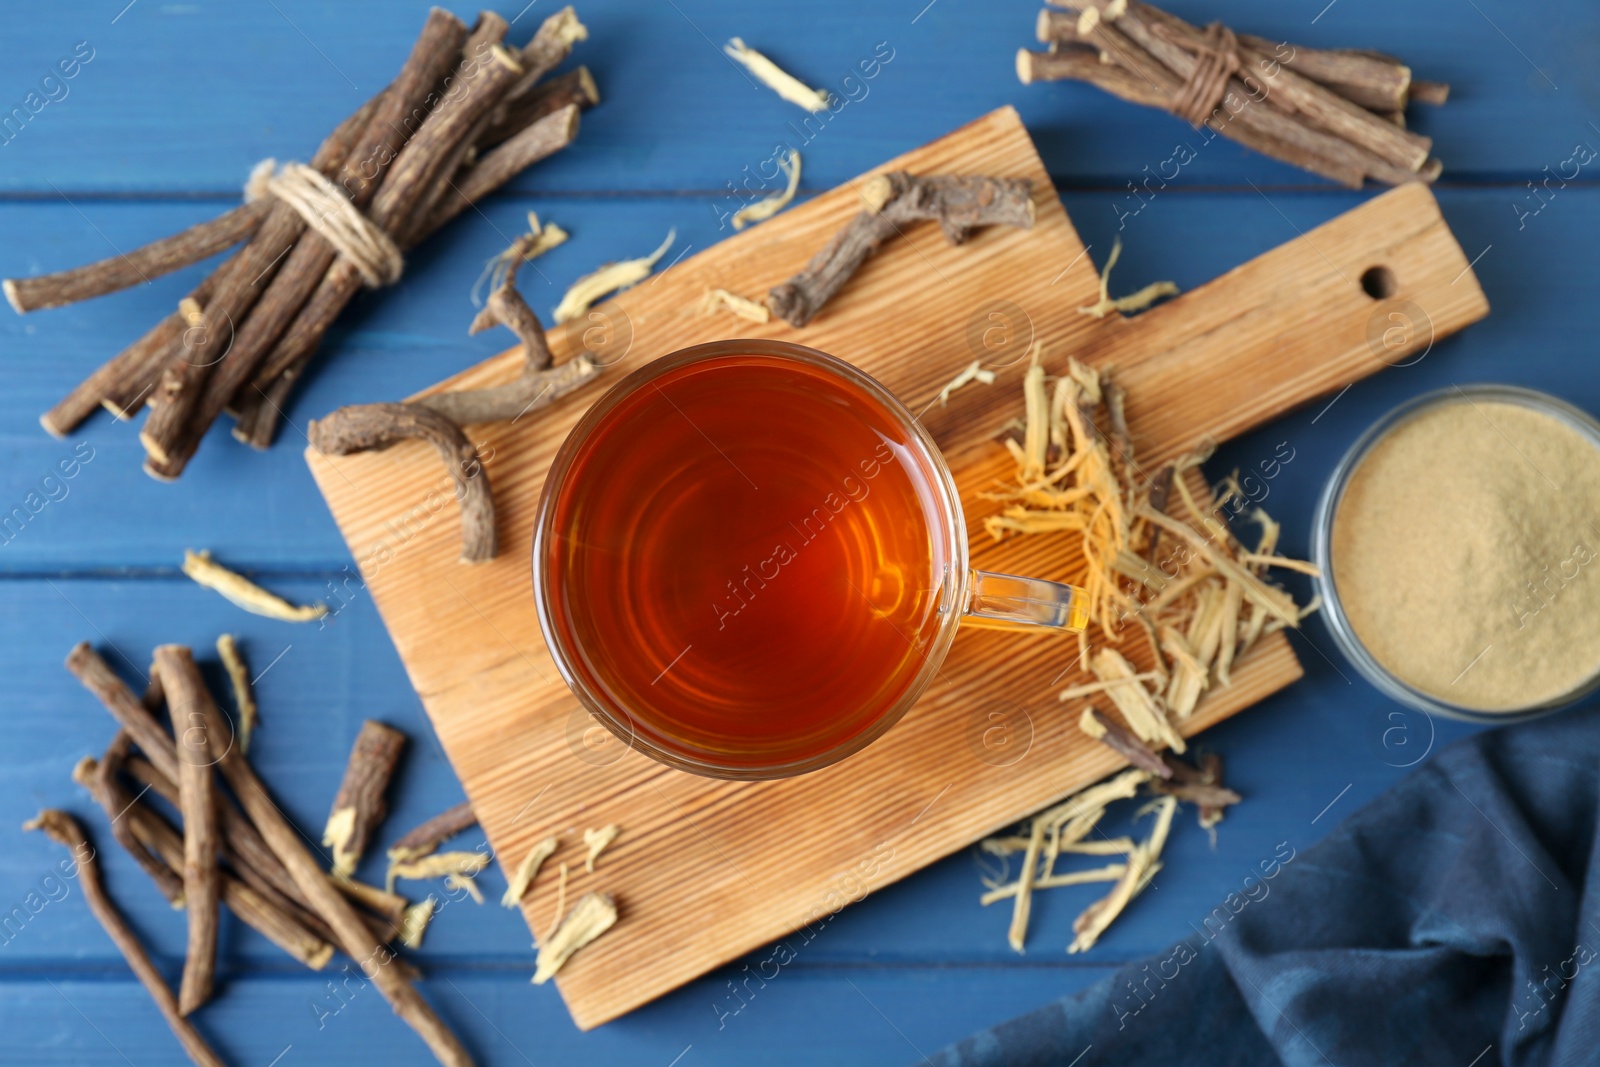 Photo of Aromatic licorice tea in cup, dried sticks of licorice root and powder on blue wooden table, flat lay